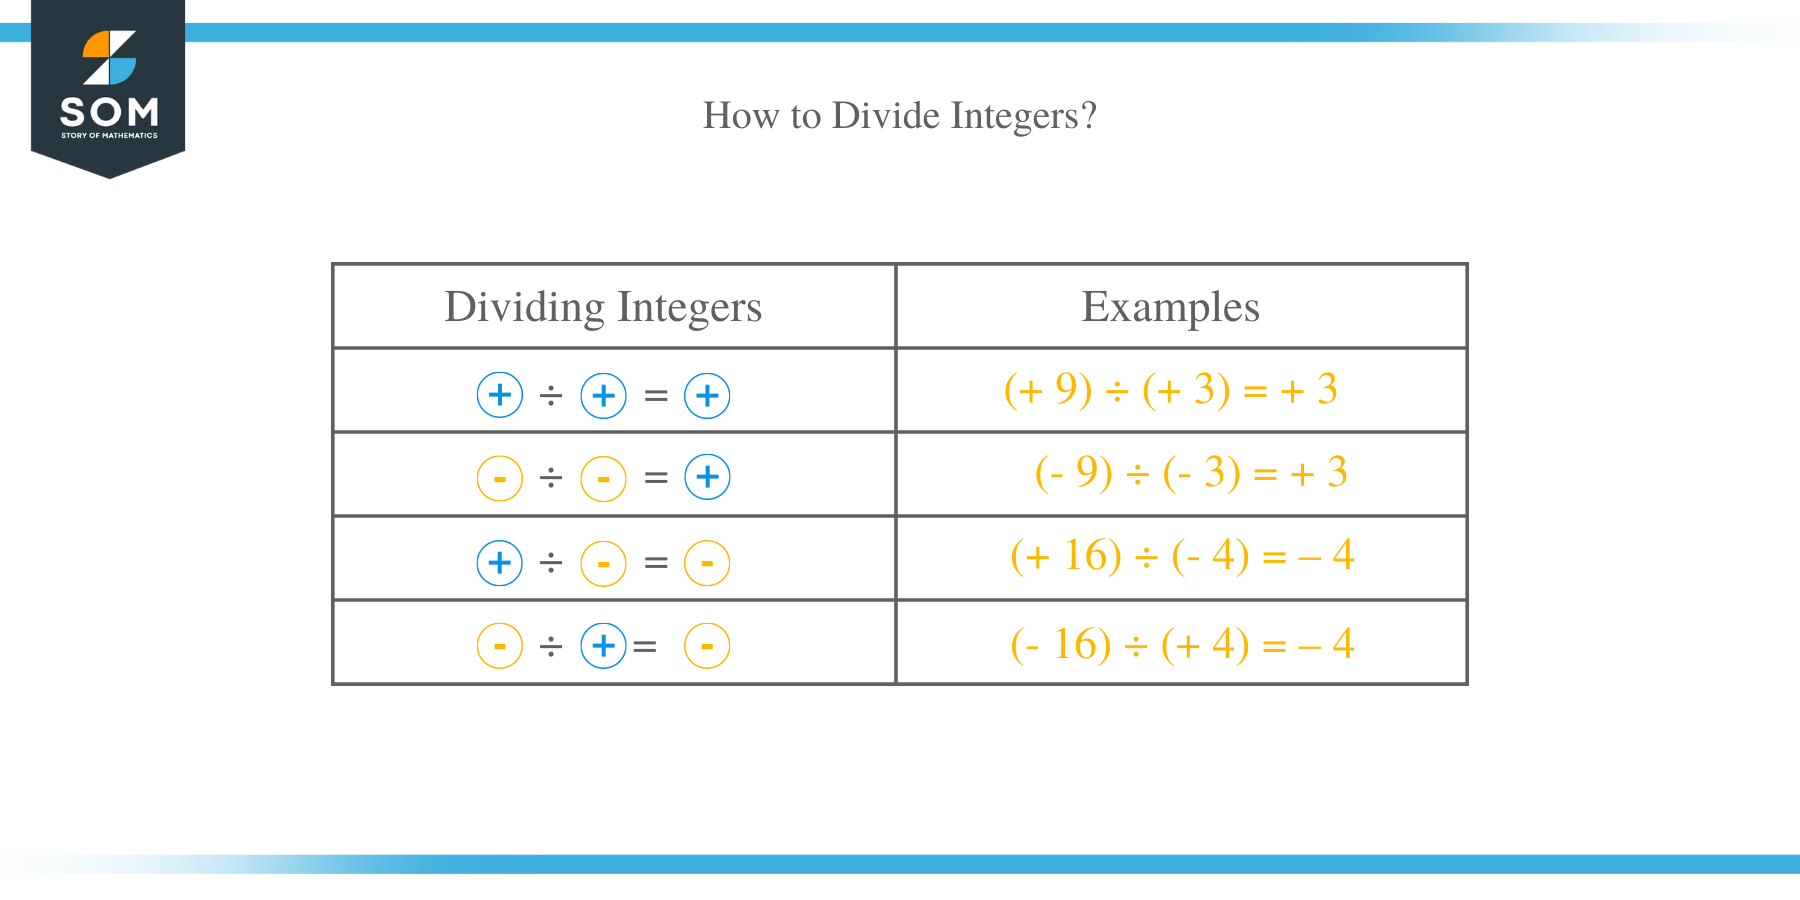 How to Divide Integers?